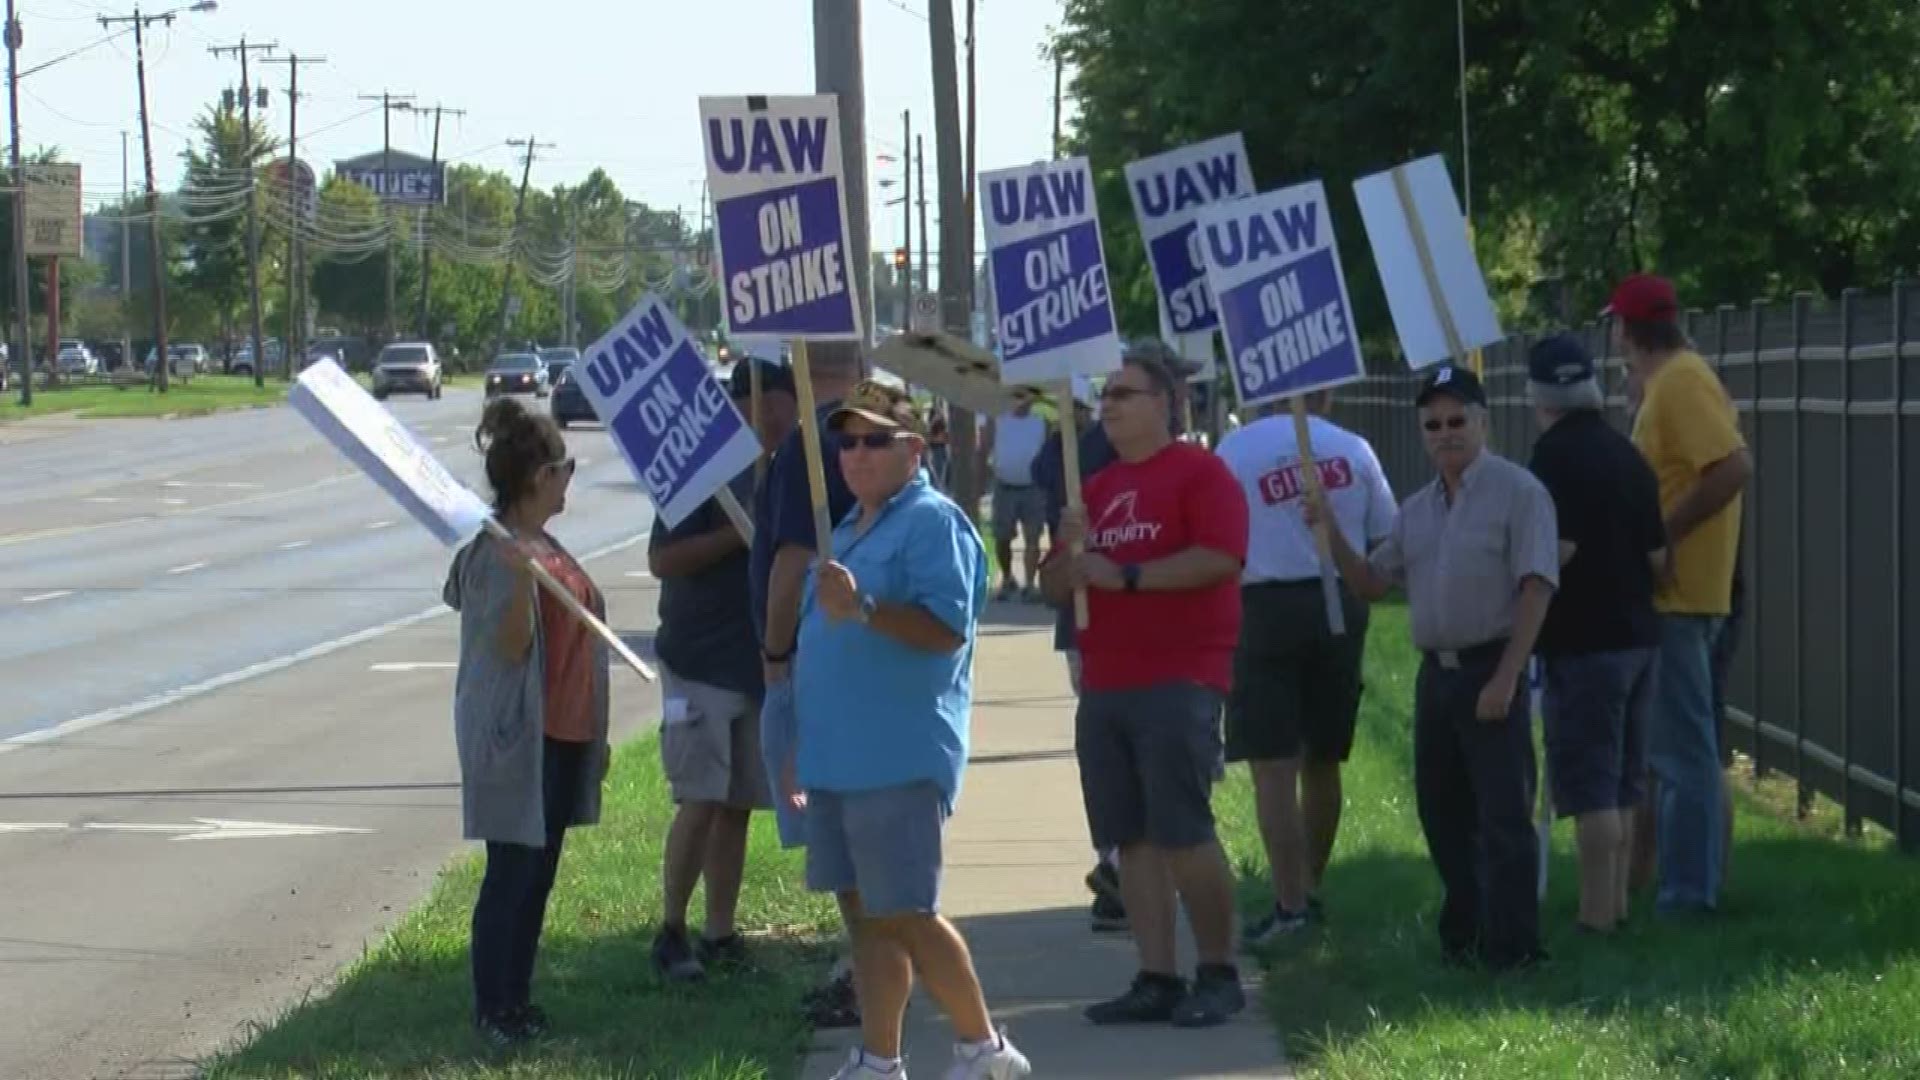 Wednesday marked day three of a planned strike of United Auto Workers union members of General Motors. Negotiations broke down Sunday between GM and the UAW.